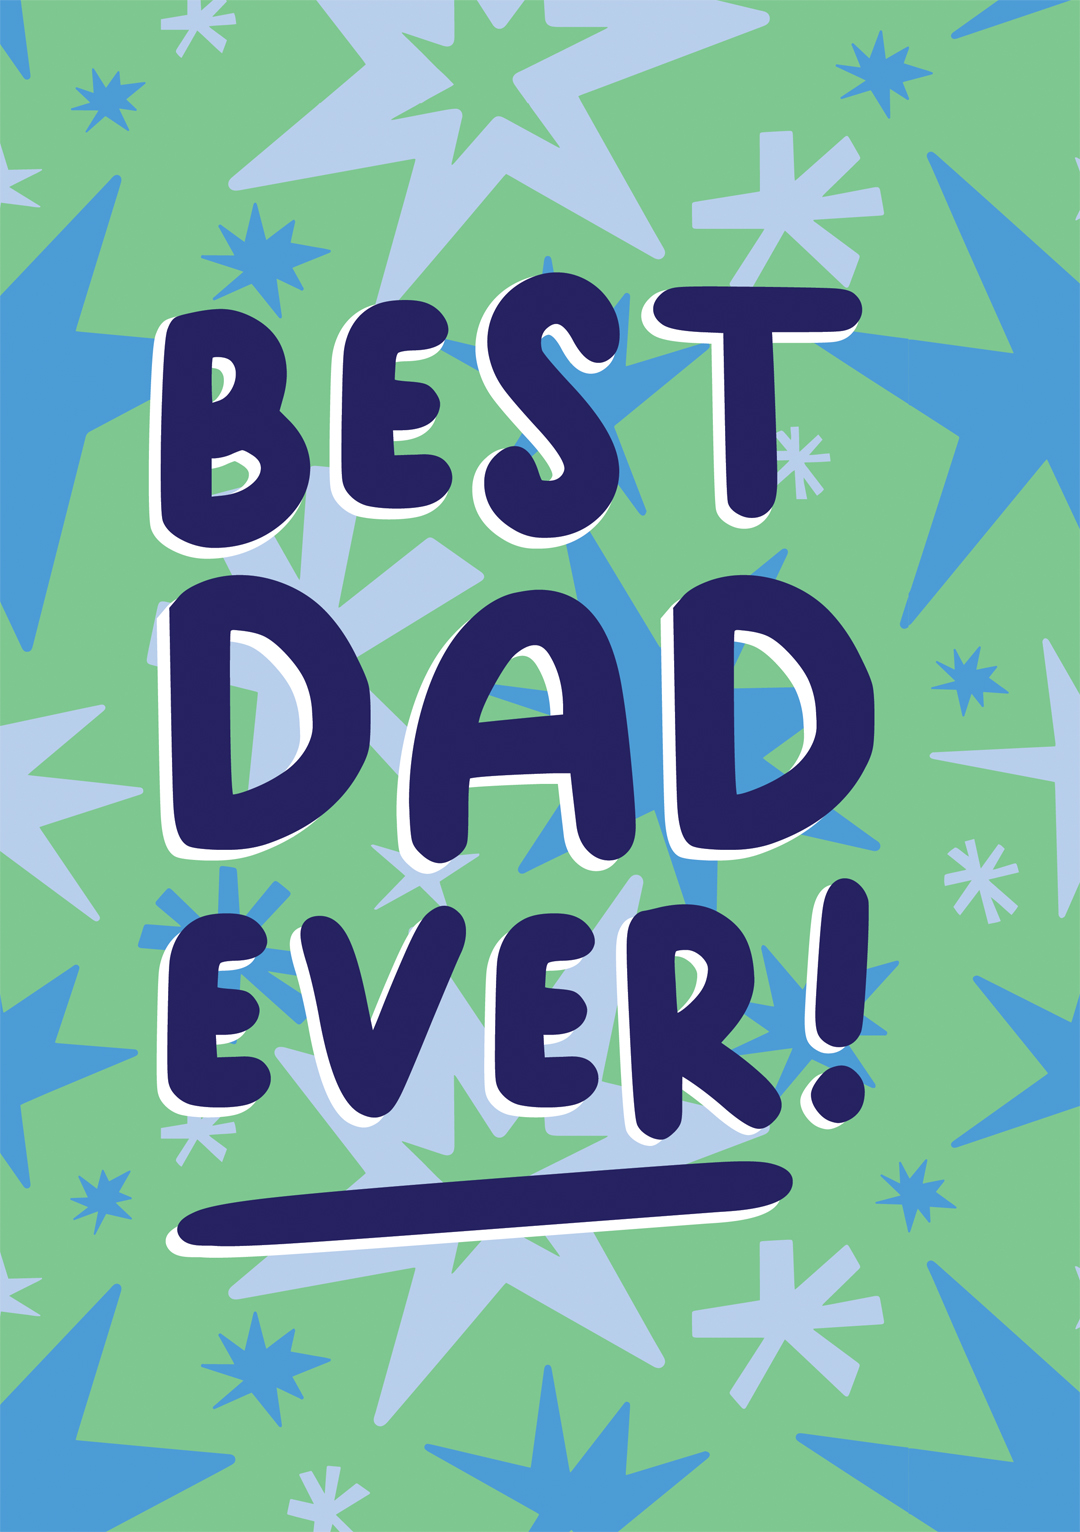 Best dad ever greeting card